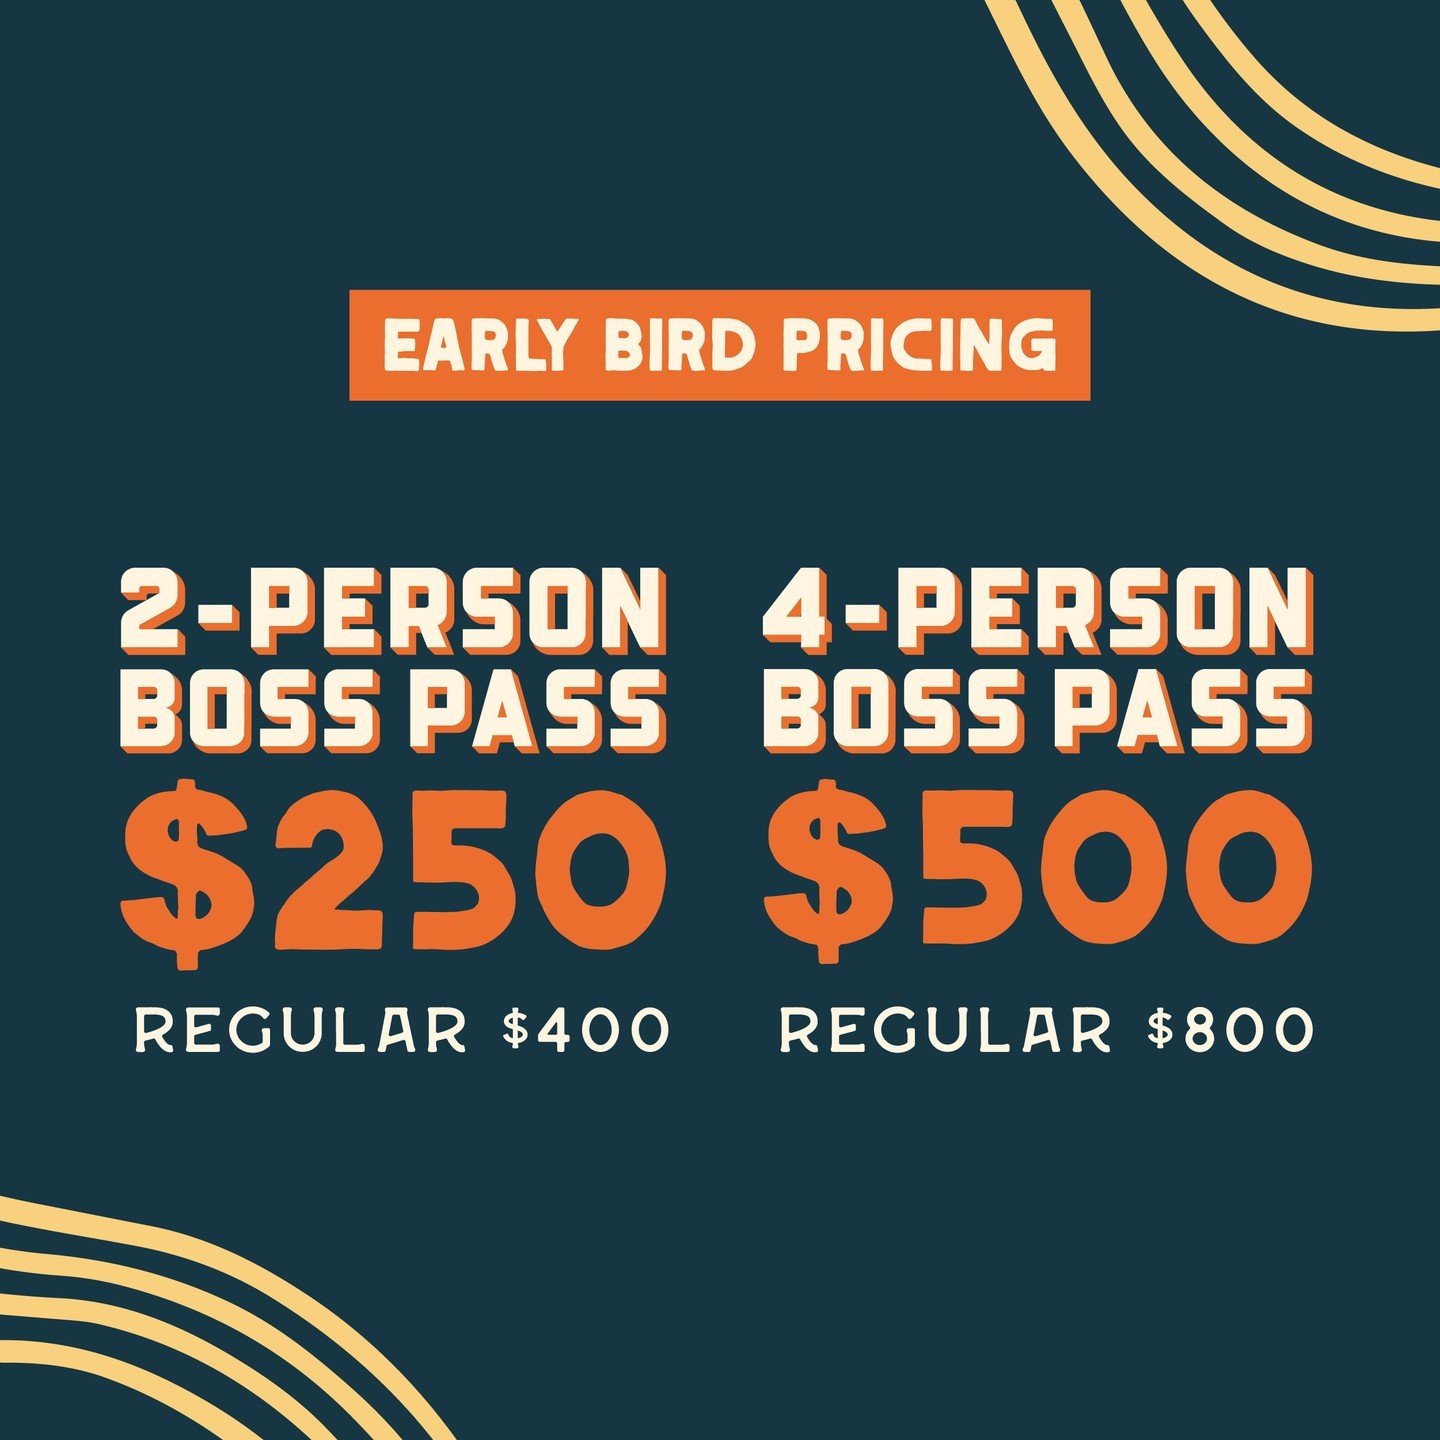 LAST CALL FOR EARLY BIRD PASSES 🐎 Don't miss your chance to take advantage of early bird pricing for your Boss Passes and Saloon Season Passes. These passes get VIP access with no cover for all of Stampede so don't sleep on 'em! Grab your early bird